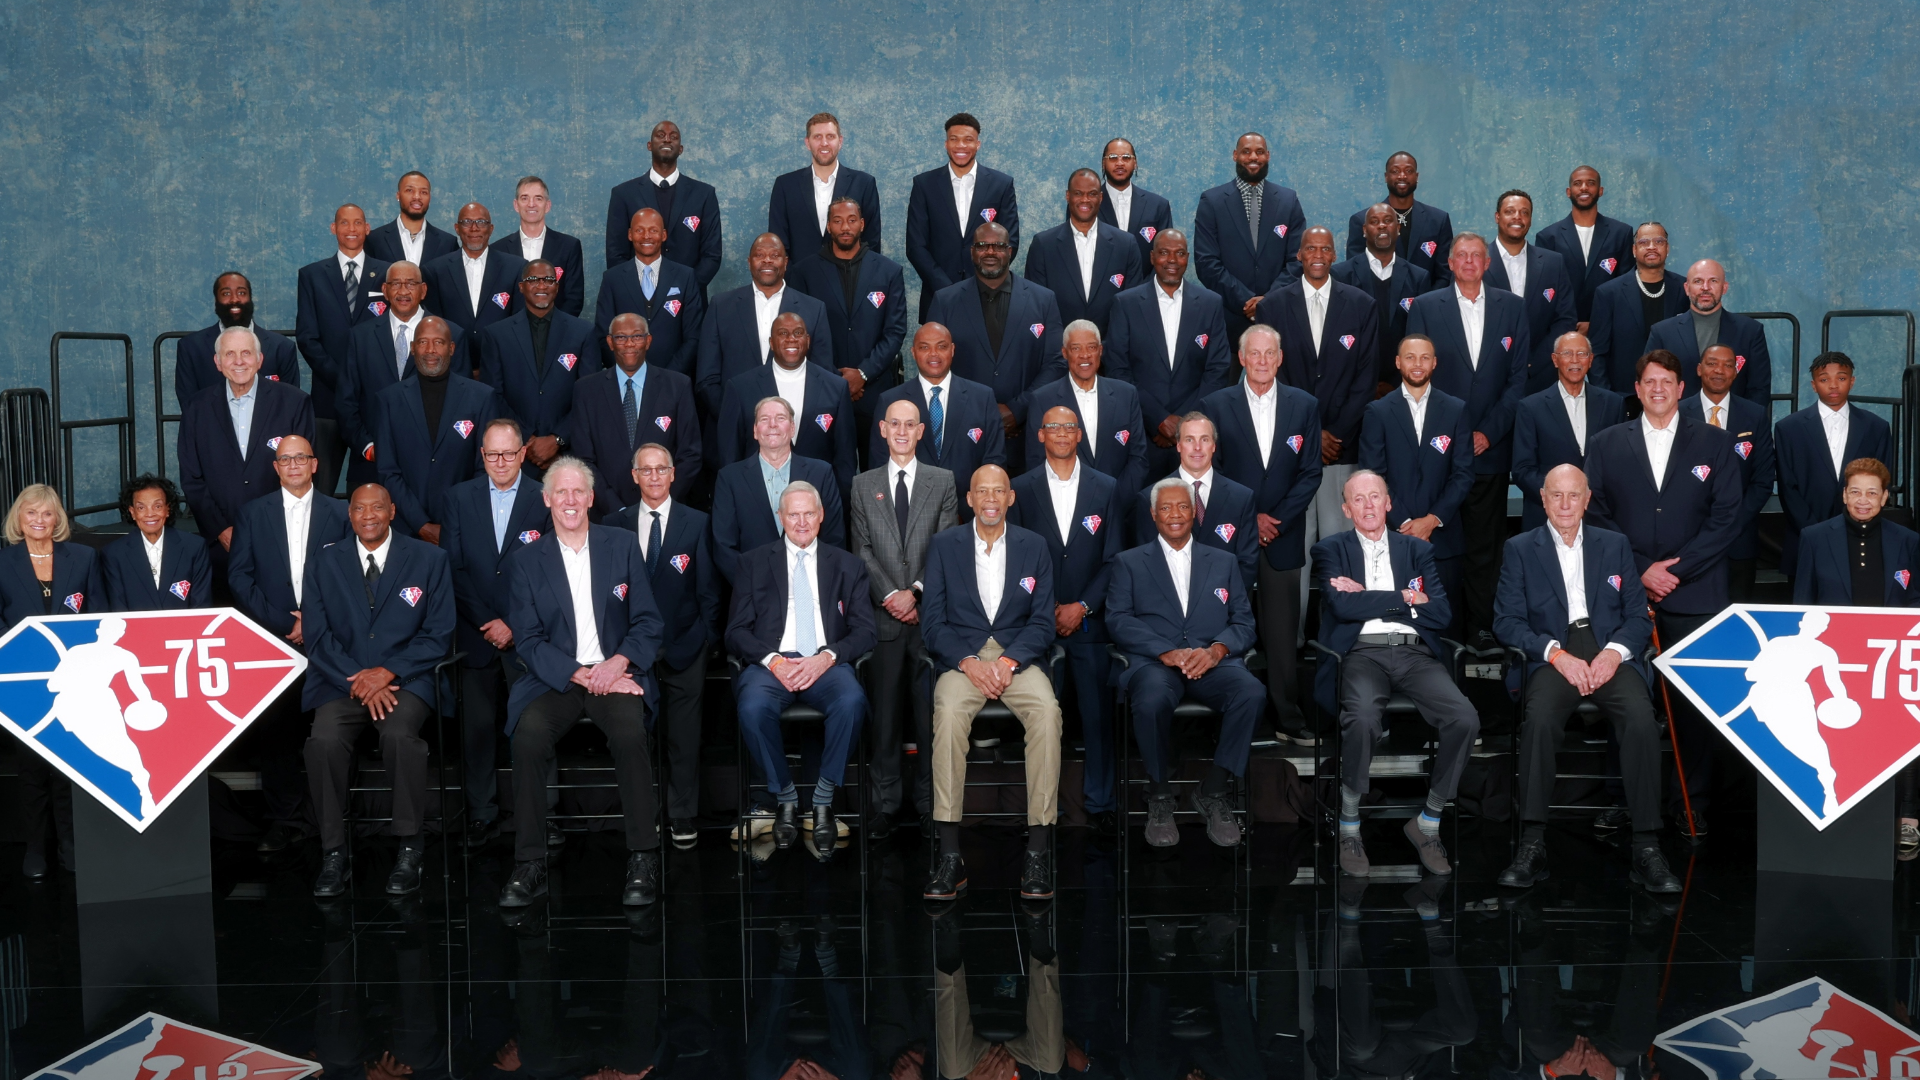 Sights and sounds from the NBA 75th Anniversary team presentation